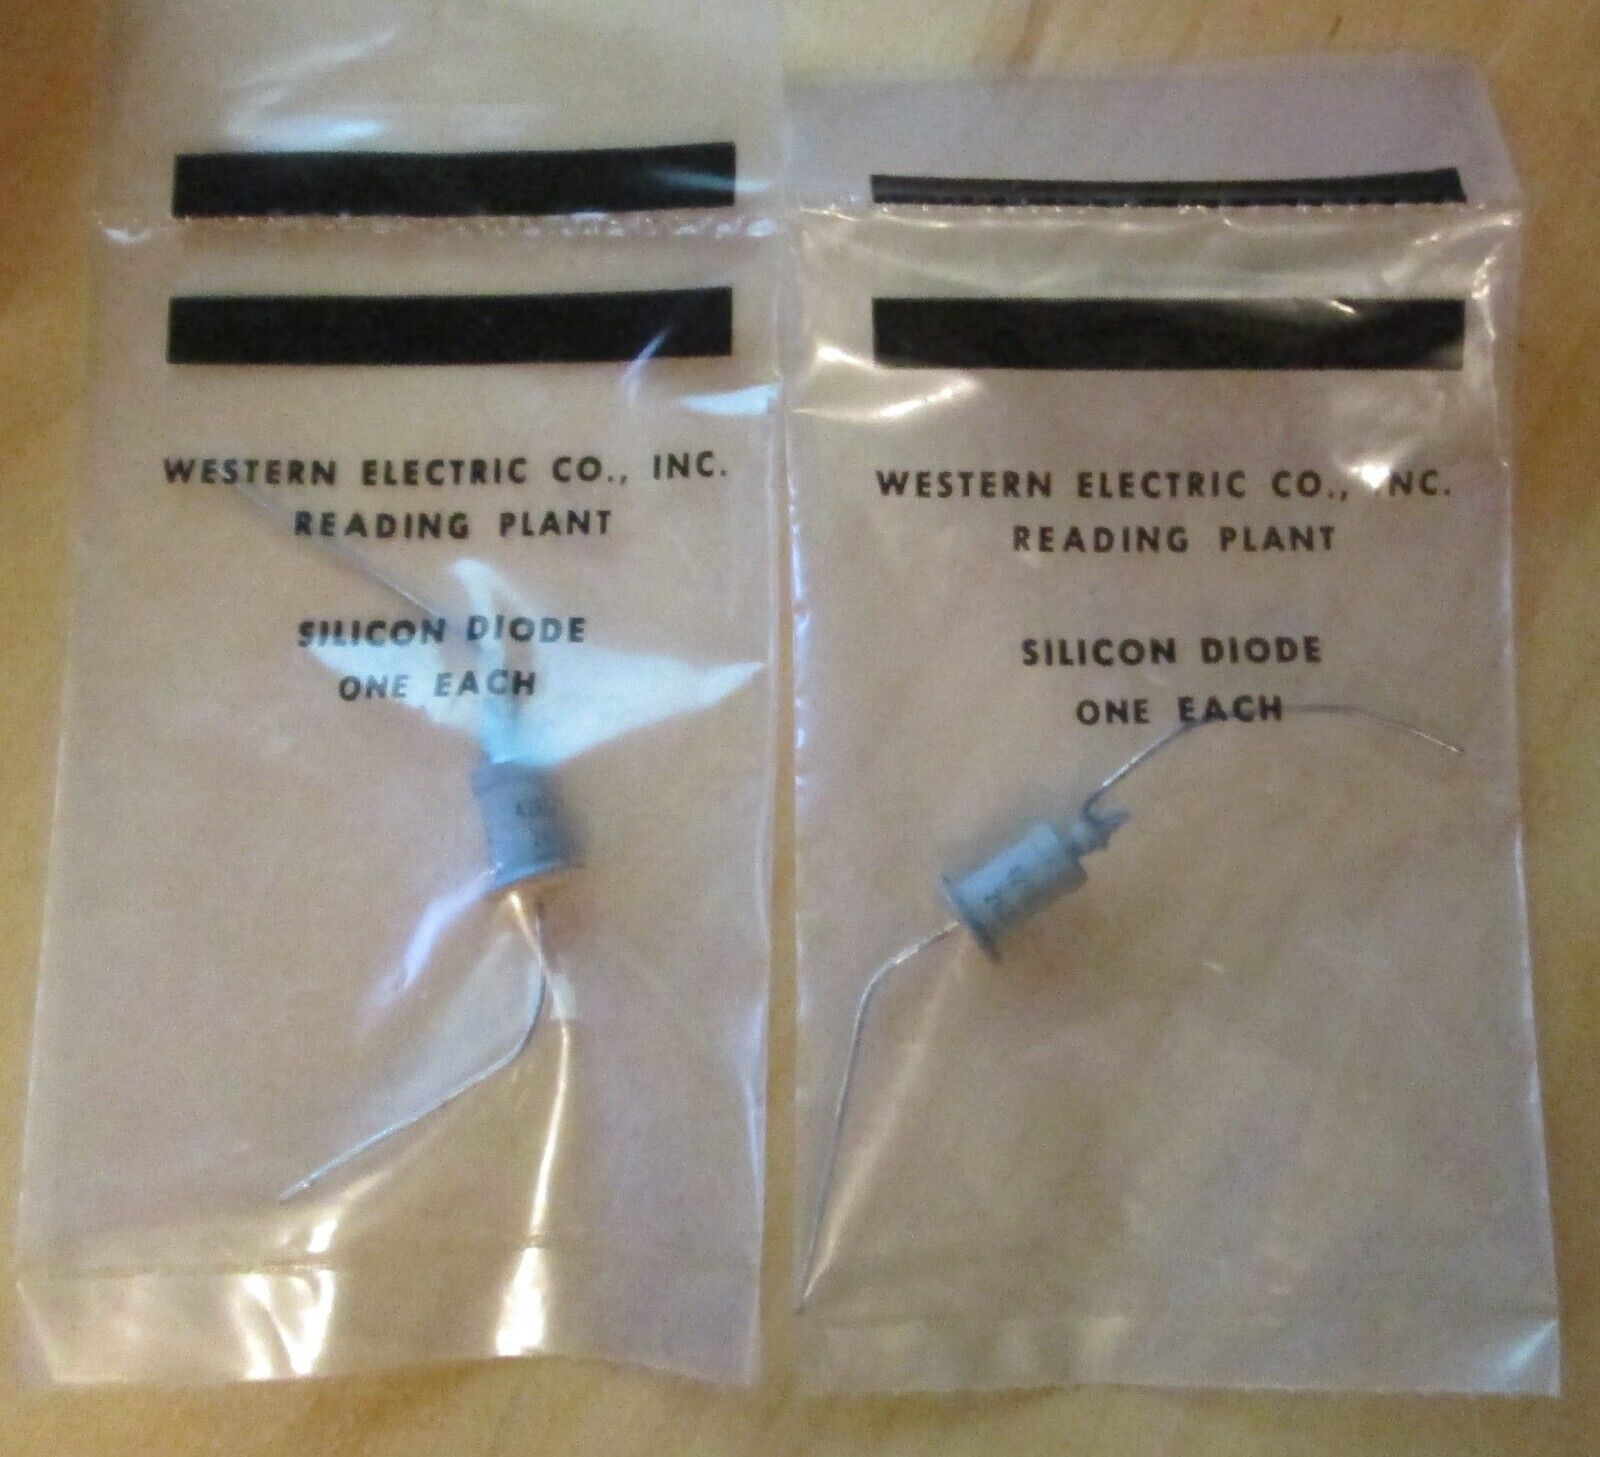 Lot of 2 NOS Western Electric 426L Diodes Sealed in Package Reading Plant